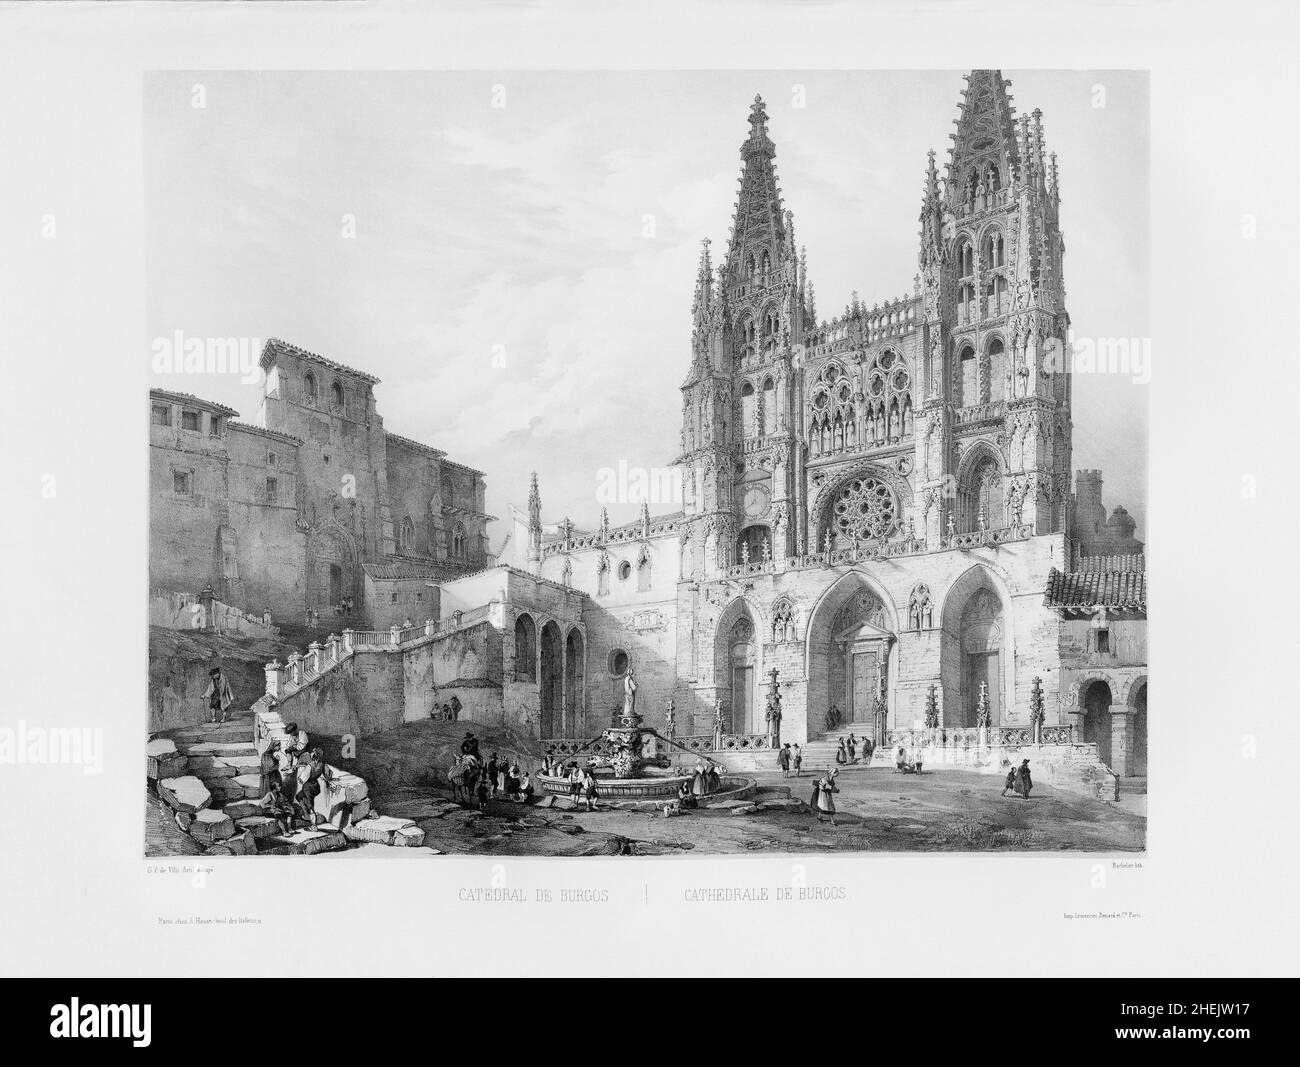 The main facade of the Gothic cathedral at Burgos, Burgos Province, Castile and Leon, Spain.  It was built during the 13th to 15th centuries and is a designated UNESCO World Heritage Site.  After a lithograph published in 1844 by Charles Claude Bachelier from a drawing by Genaro Pérez Villaamil y Duguet. Stock Photo